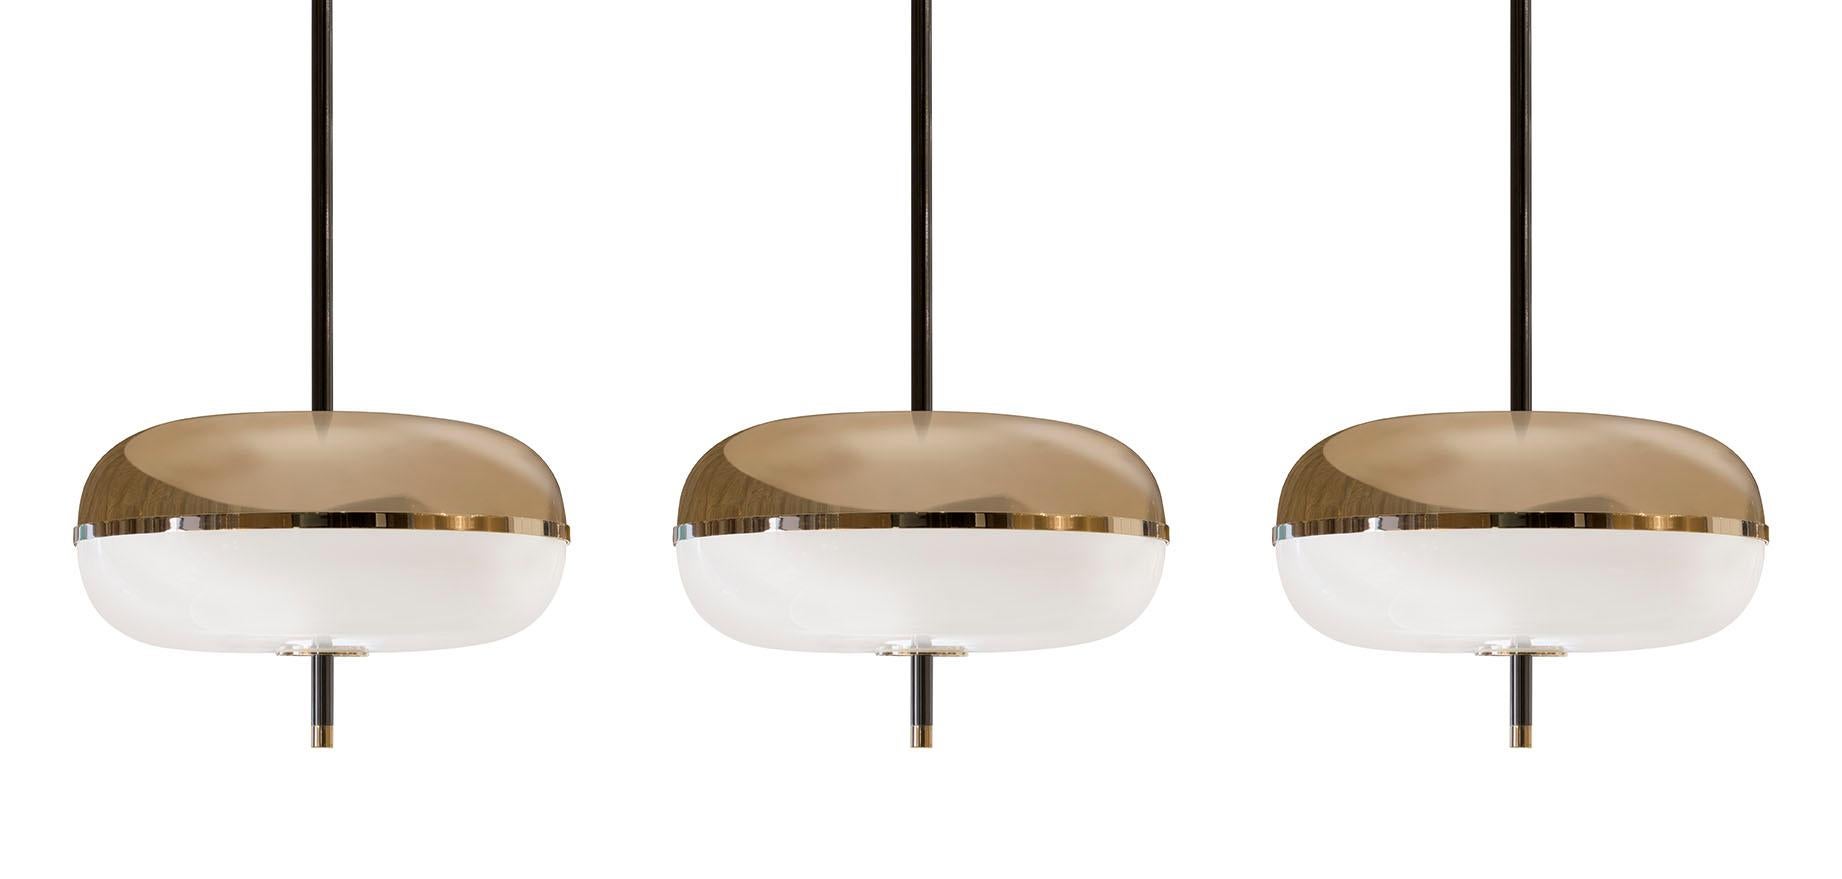 Suspension ceiling lamp, a design object suitable for any environment, from the living room to the bedroom, with metal and blown glass structure.

Materials
Ceiling lamp made with metal structure in polished black nickel and polished champagne